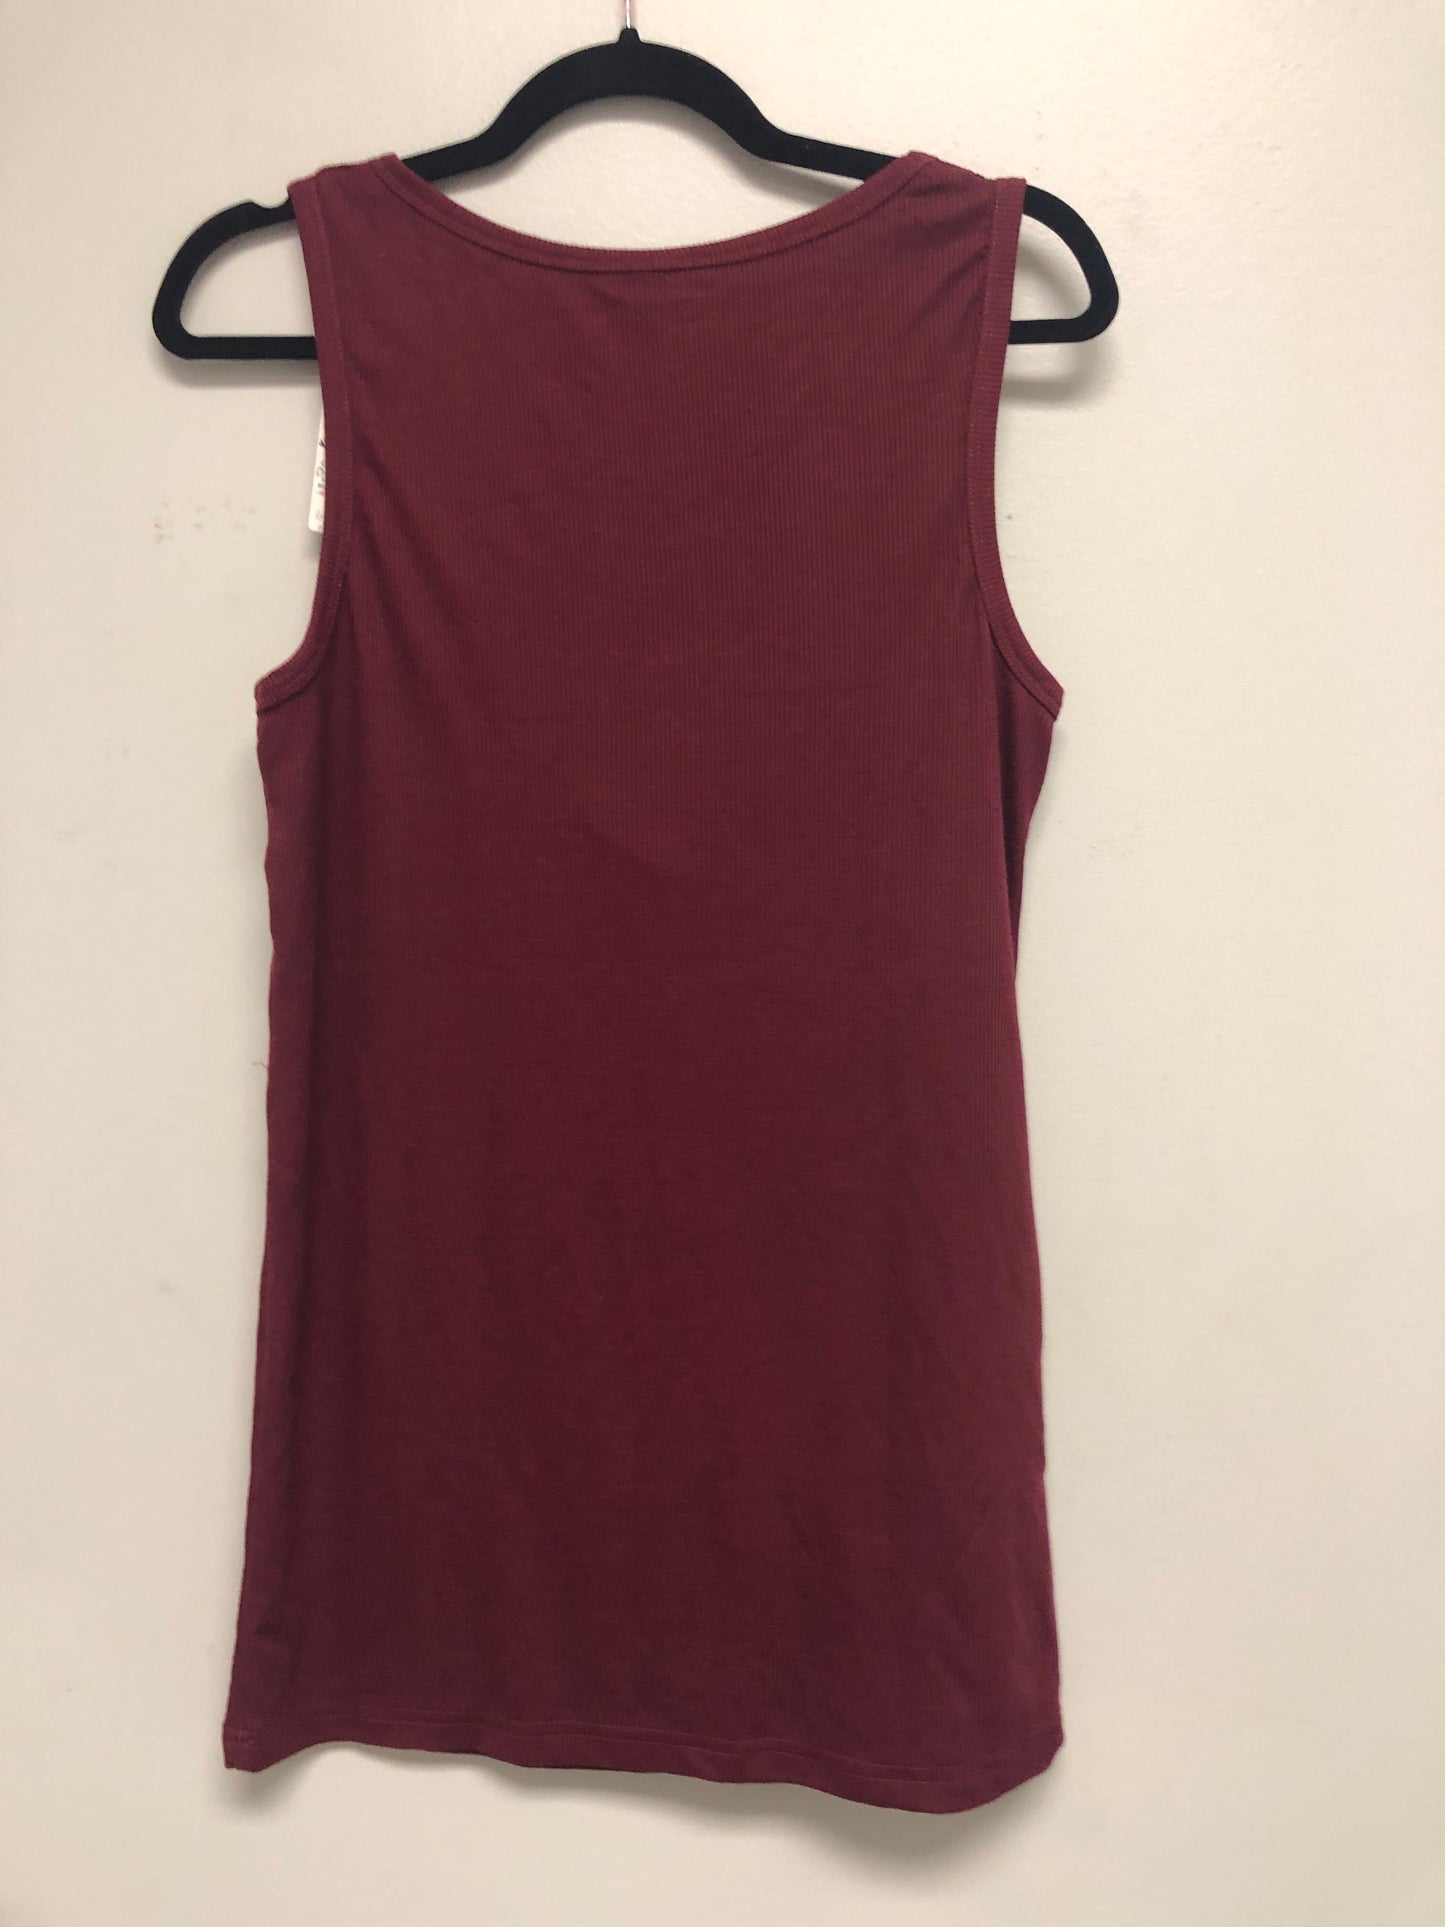 Outlet 6320 - Latched Mama Ribbed Nursing Tank - Wine - Medium